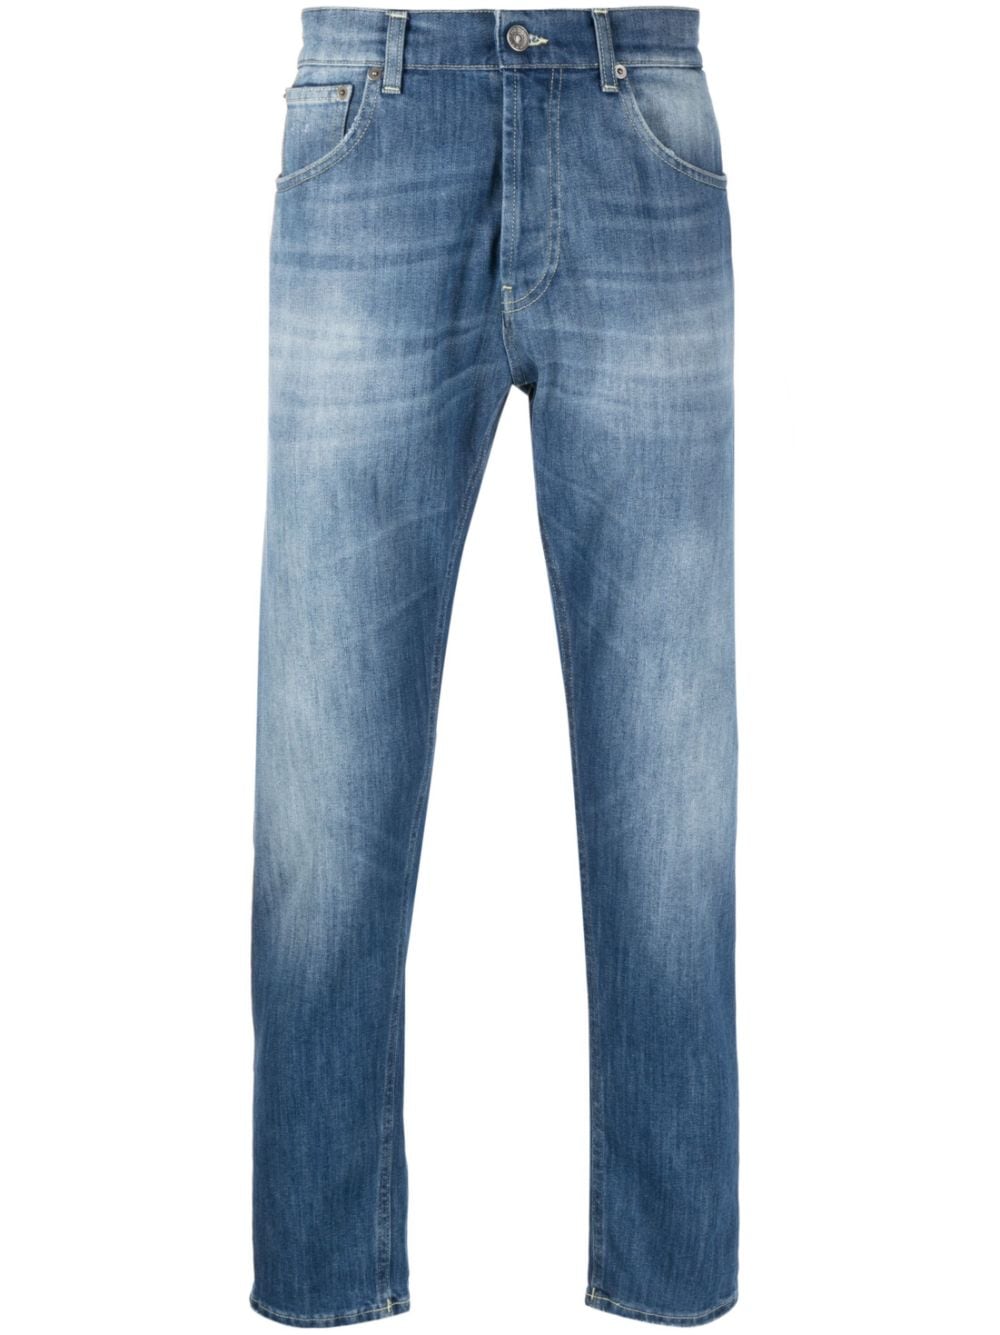 DONDUP WHISKERING-EFFECT LOW-RISE TAPERED JEANS